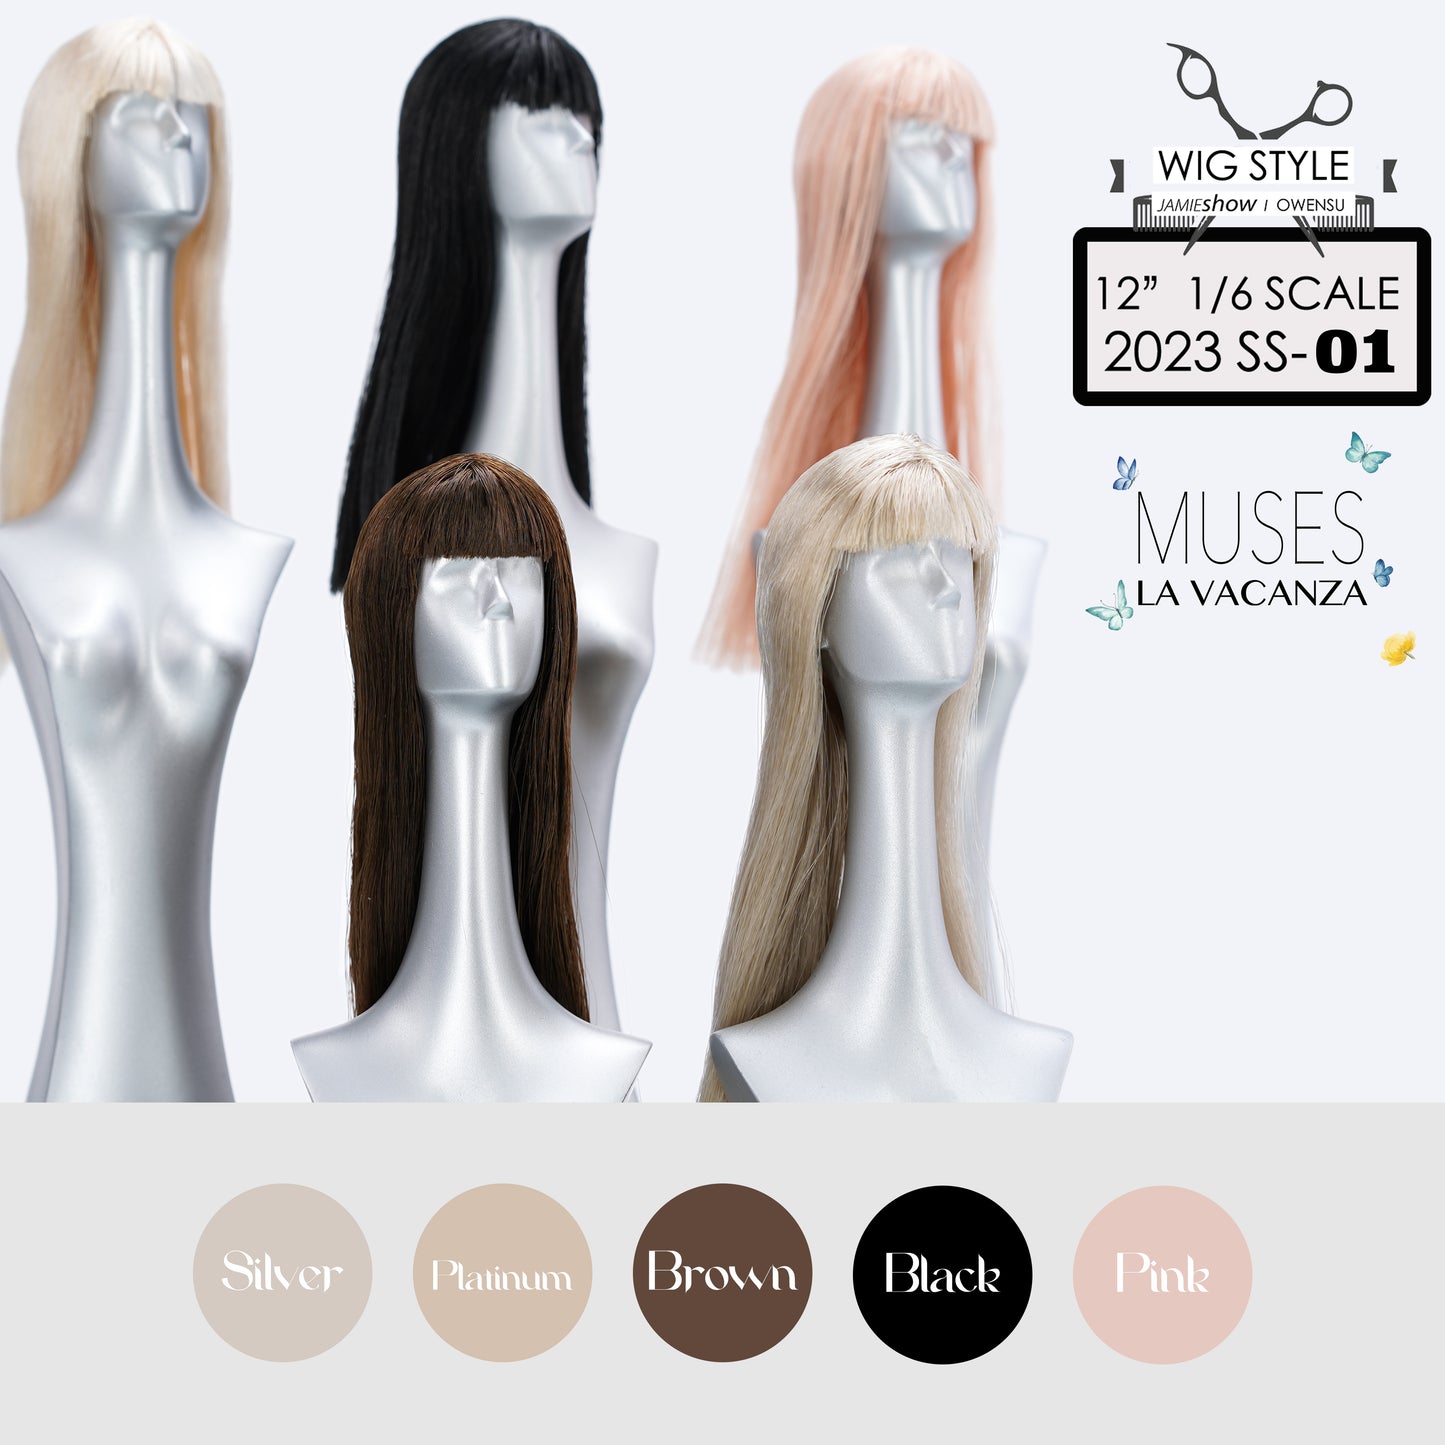 Muses La Vacanza Wig Style 1, Pre-Oder for Winter 2023 Delivery.